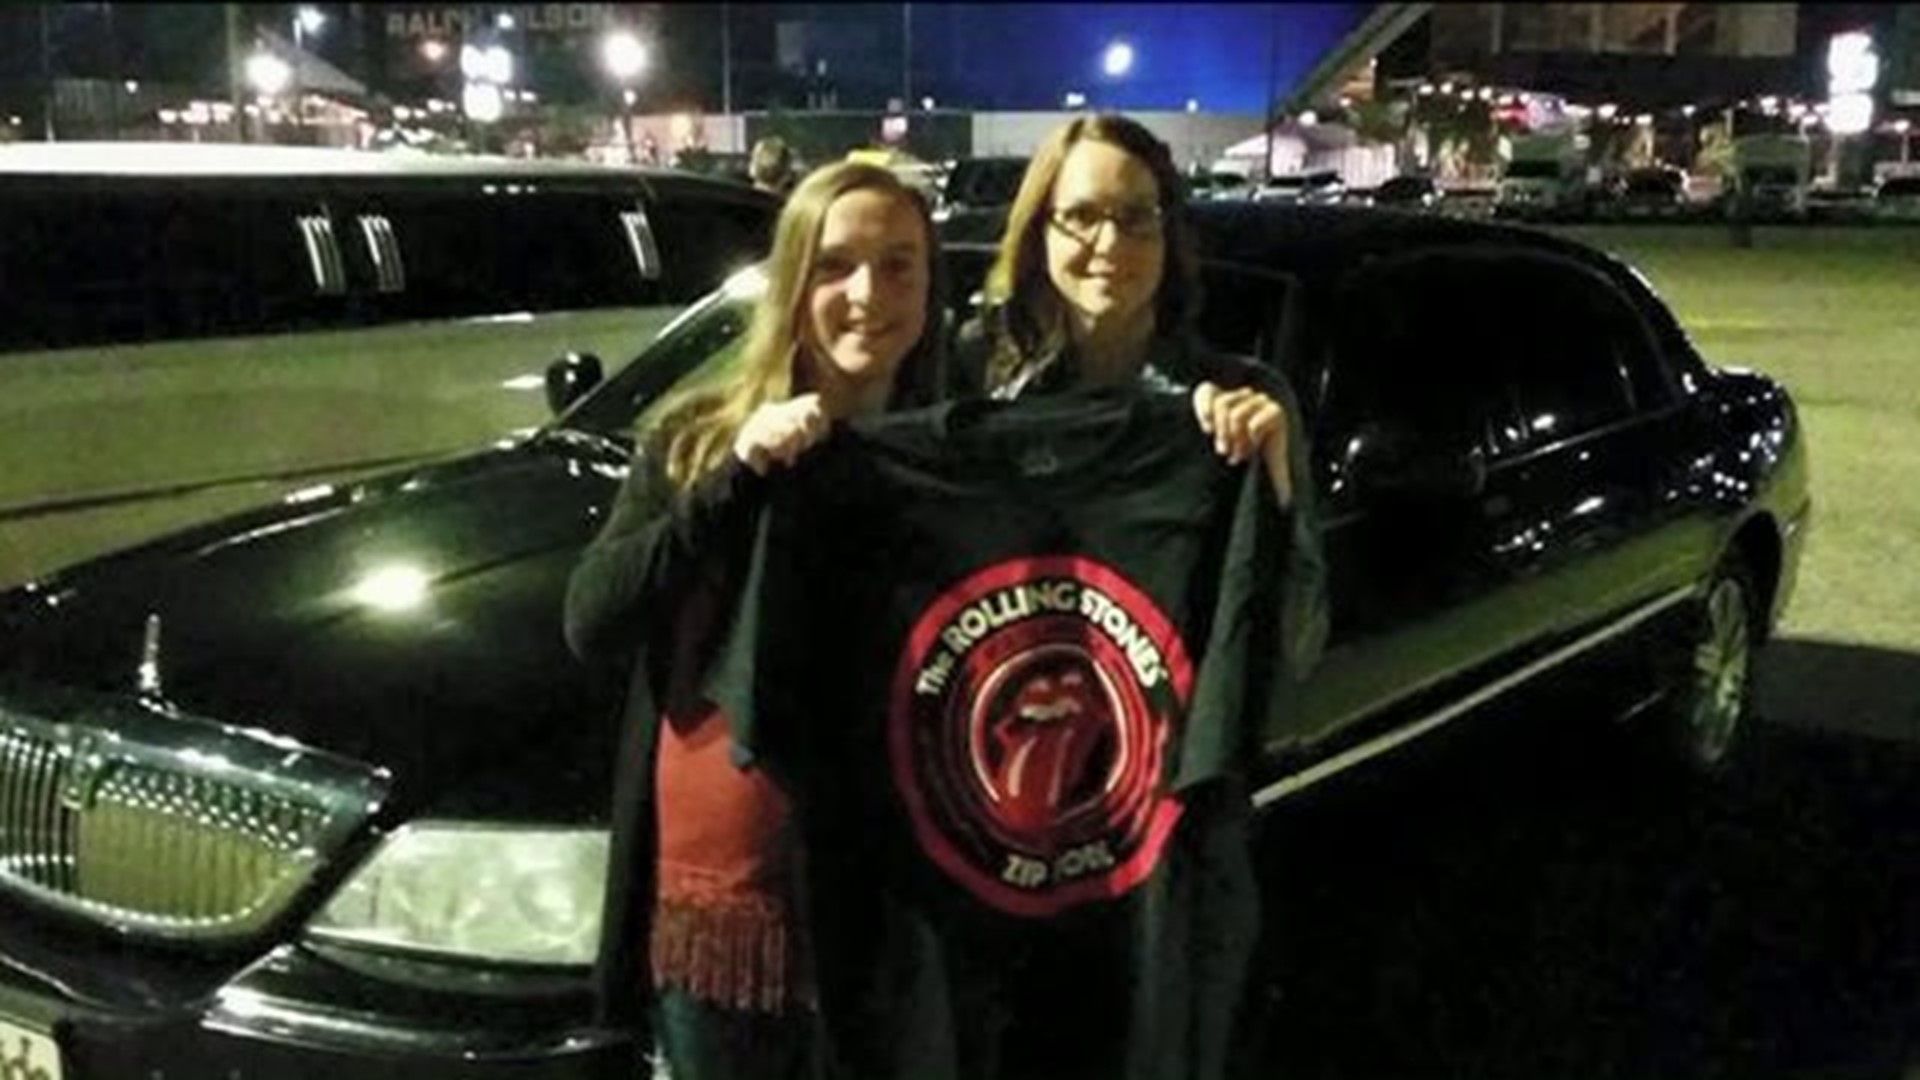 Transplant Patient Pays It Forward with Rolling Stones Tickets